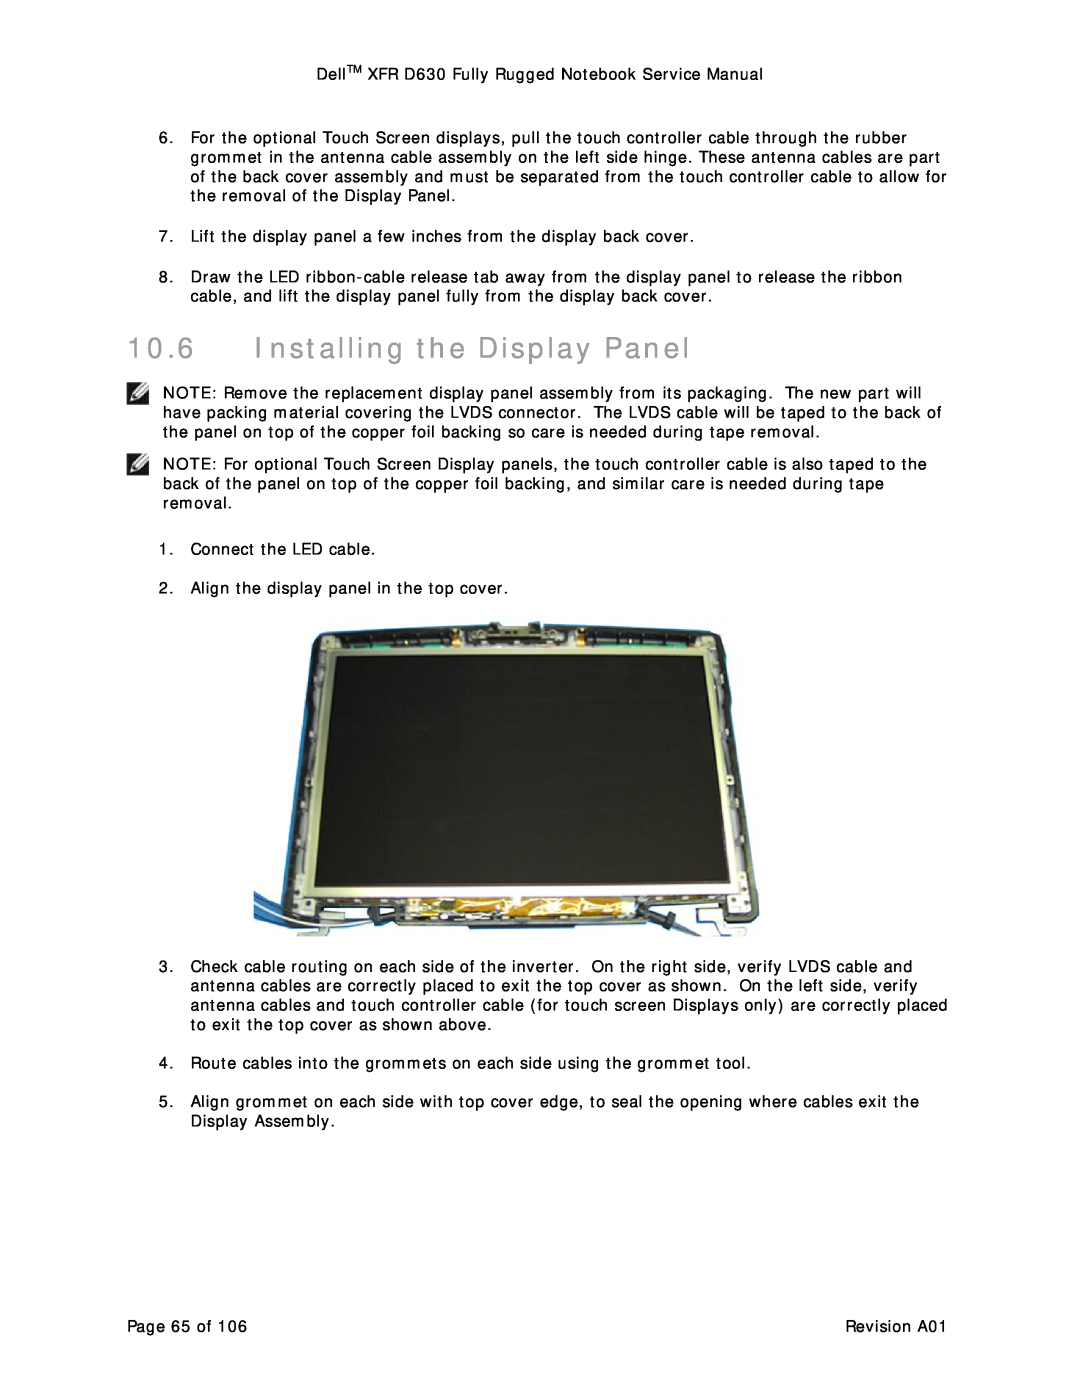 Dell D630 service manual Installing the Display Panel 